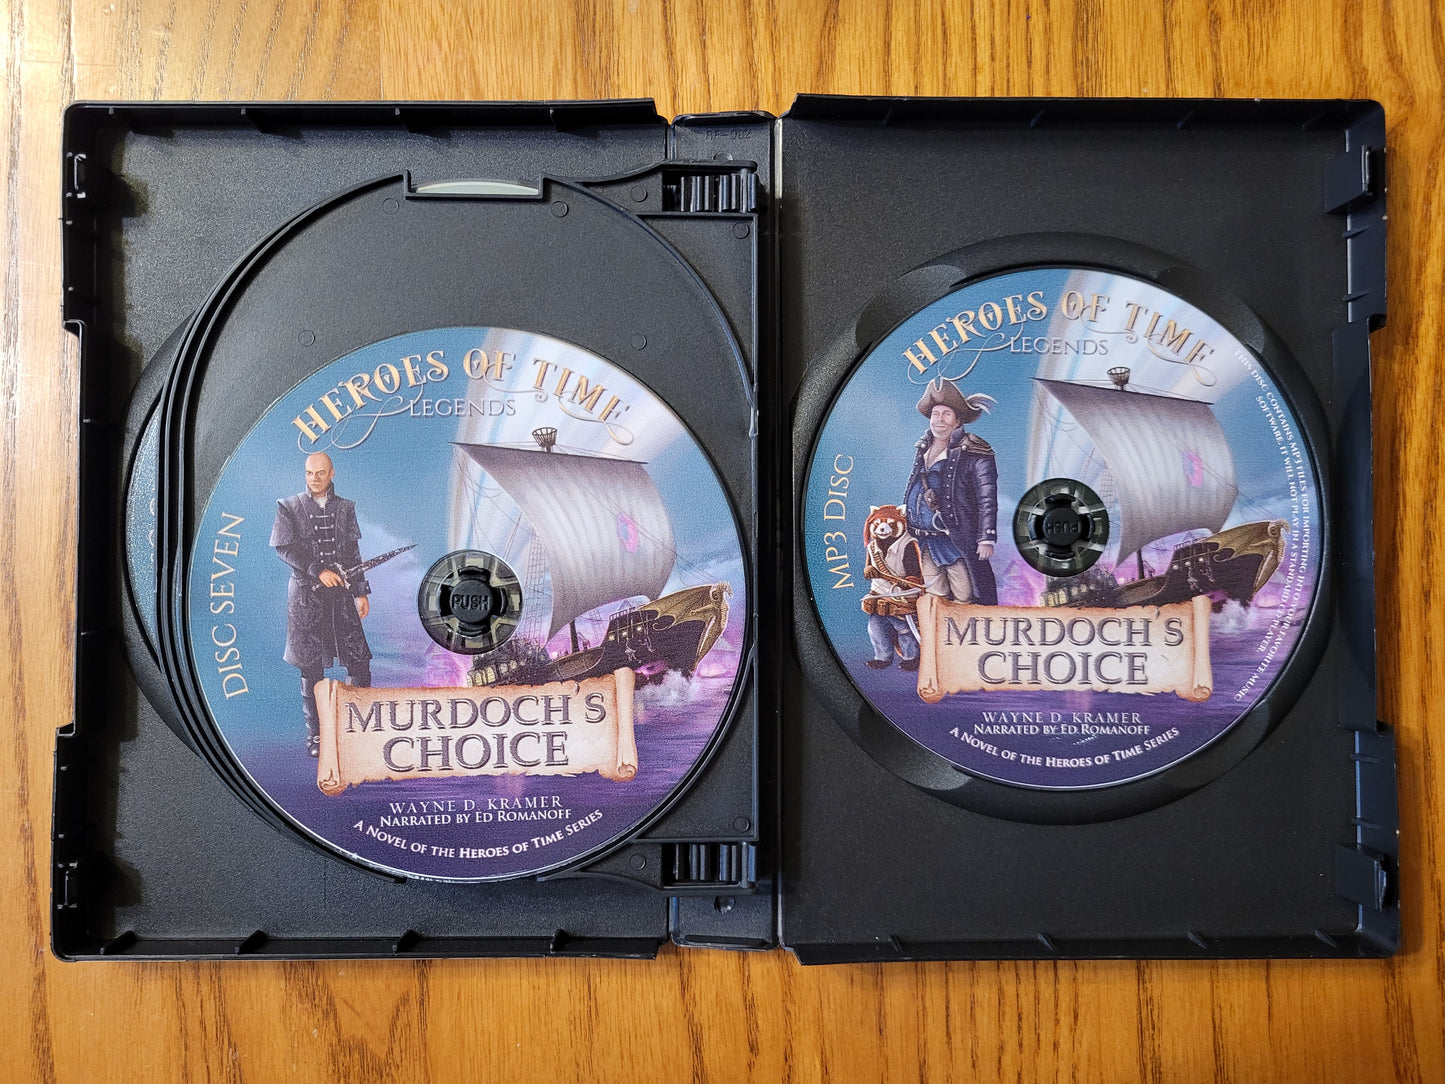 Murdoch's Choice Audiobook CD Discs 7 and MP3 Disc, featuring Fulgar, Zale, and Boomer art